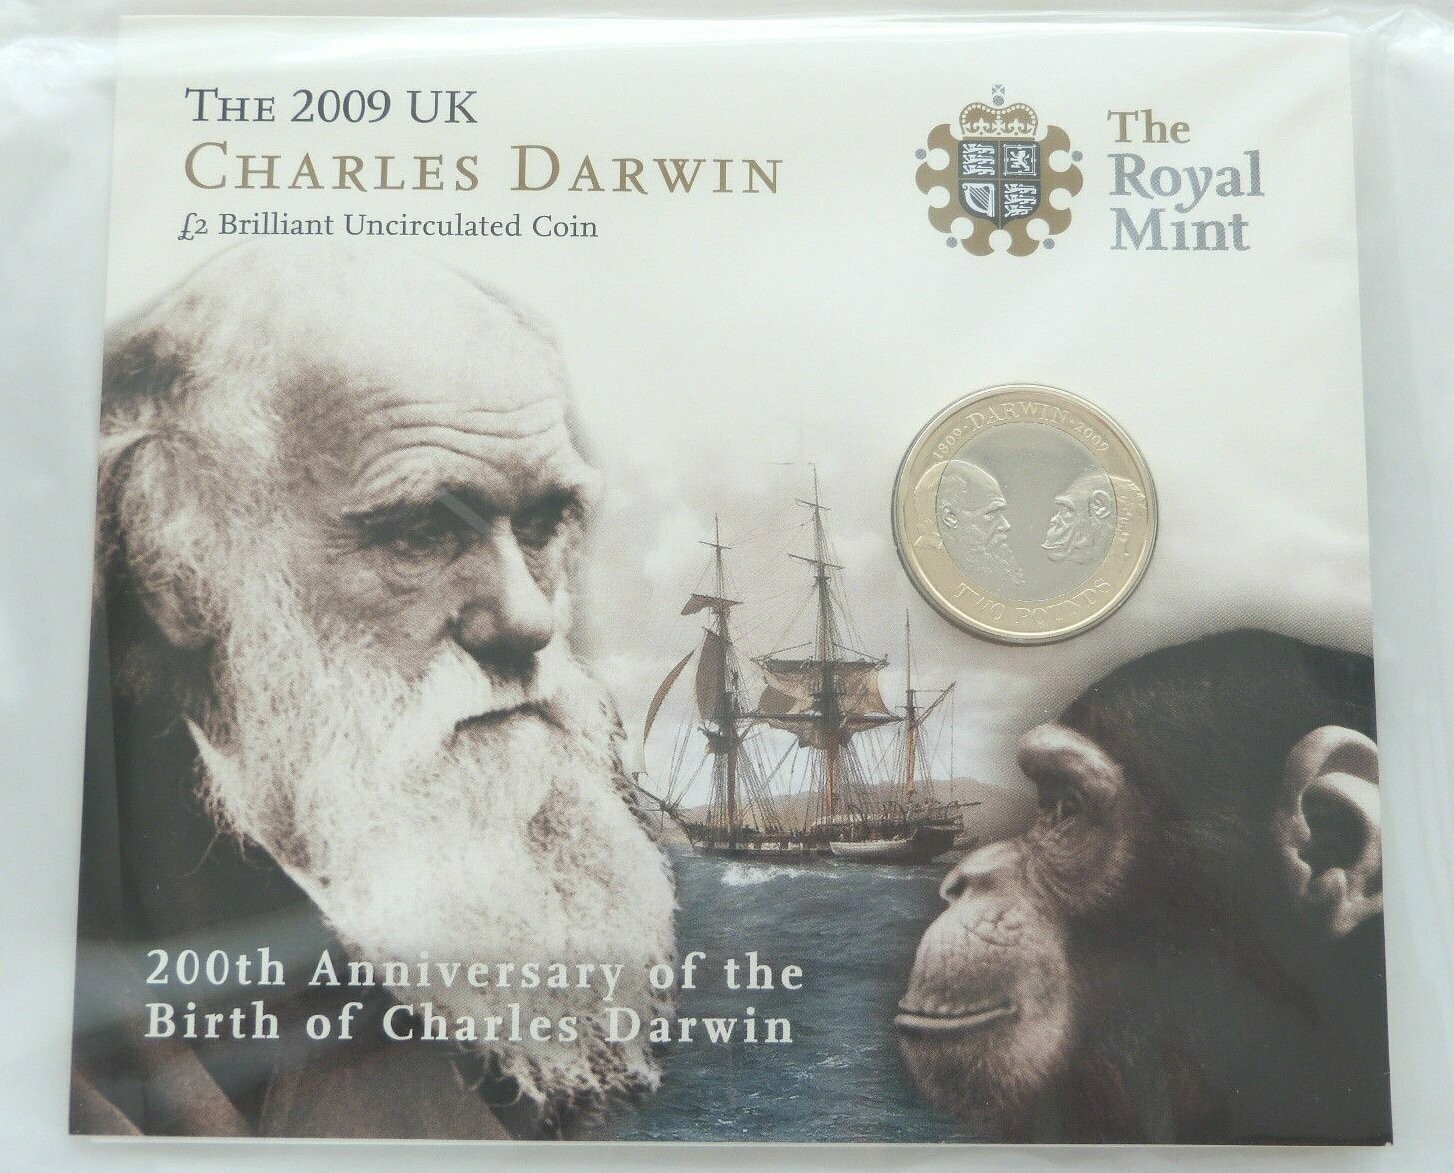 PRESENTATION PACKS £2 Two POUND BRILLIANT UNCIRCULATED COIN PACKS 